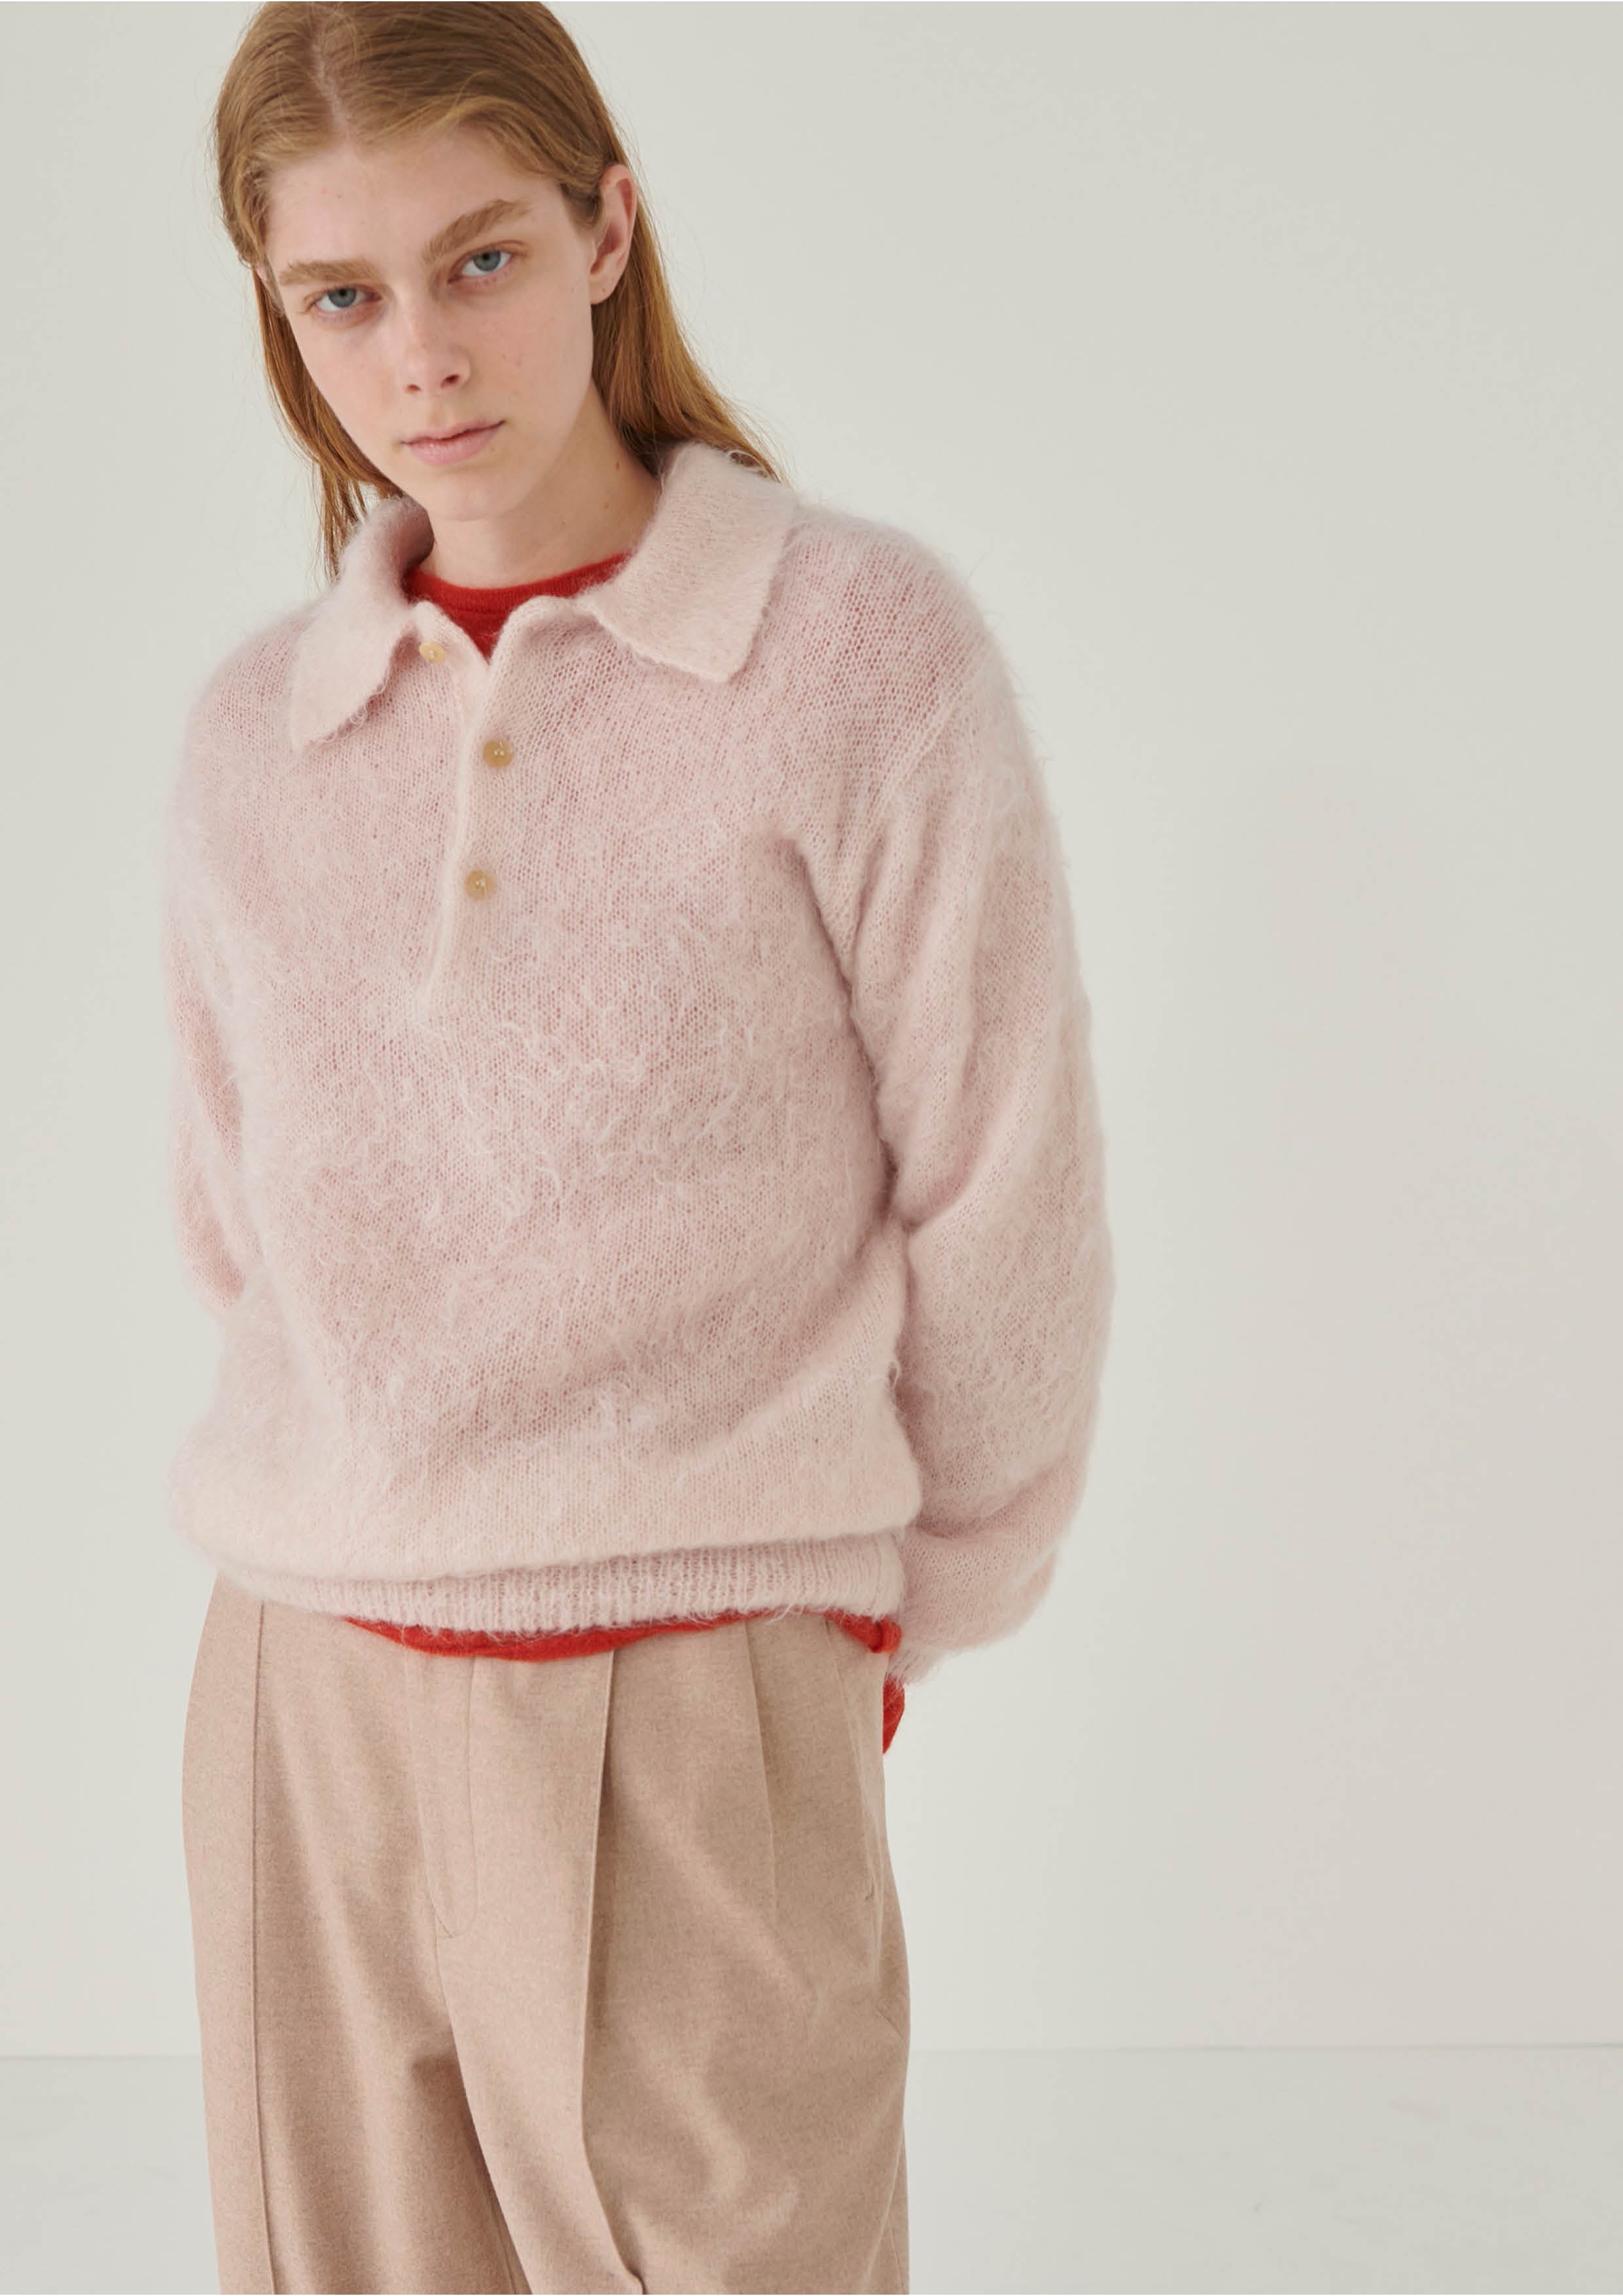 AURALEE - BRUSHED SUPER KID MOHAIR KNIT POLO - LIGHT PINK